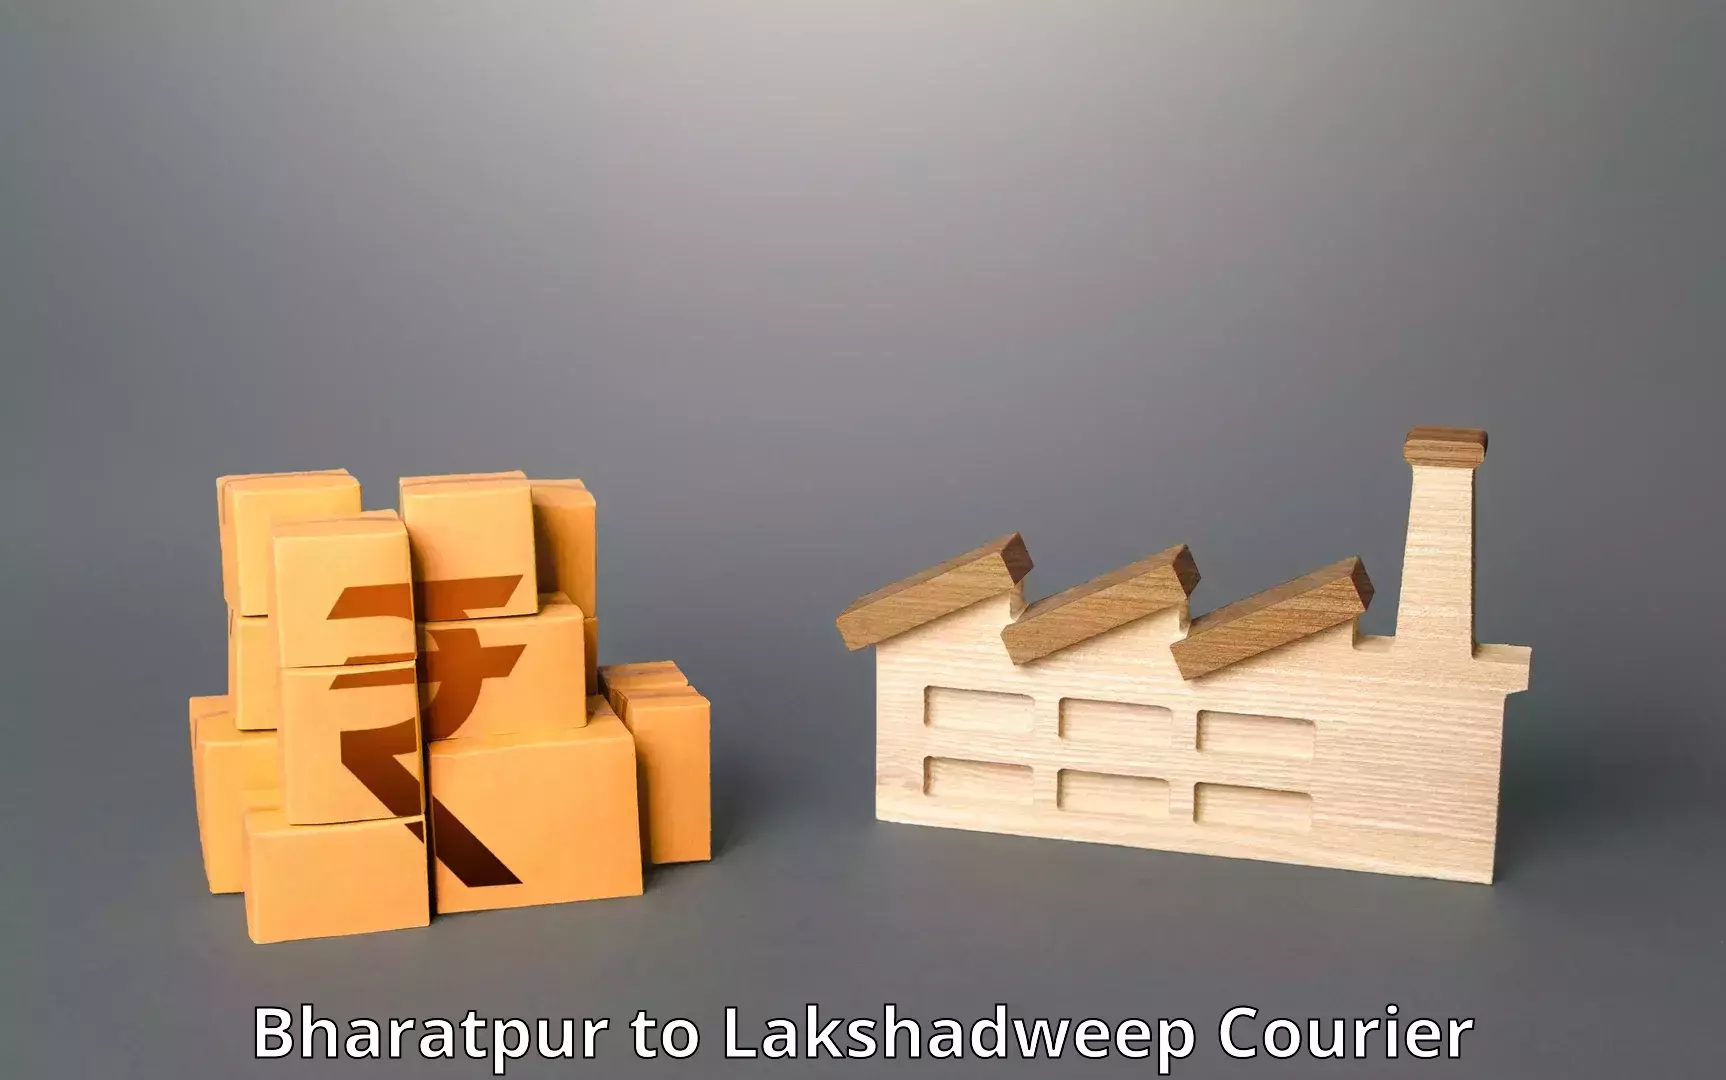 Courier service comparison Bharatpur to Lakshadweep